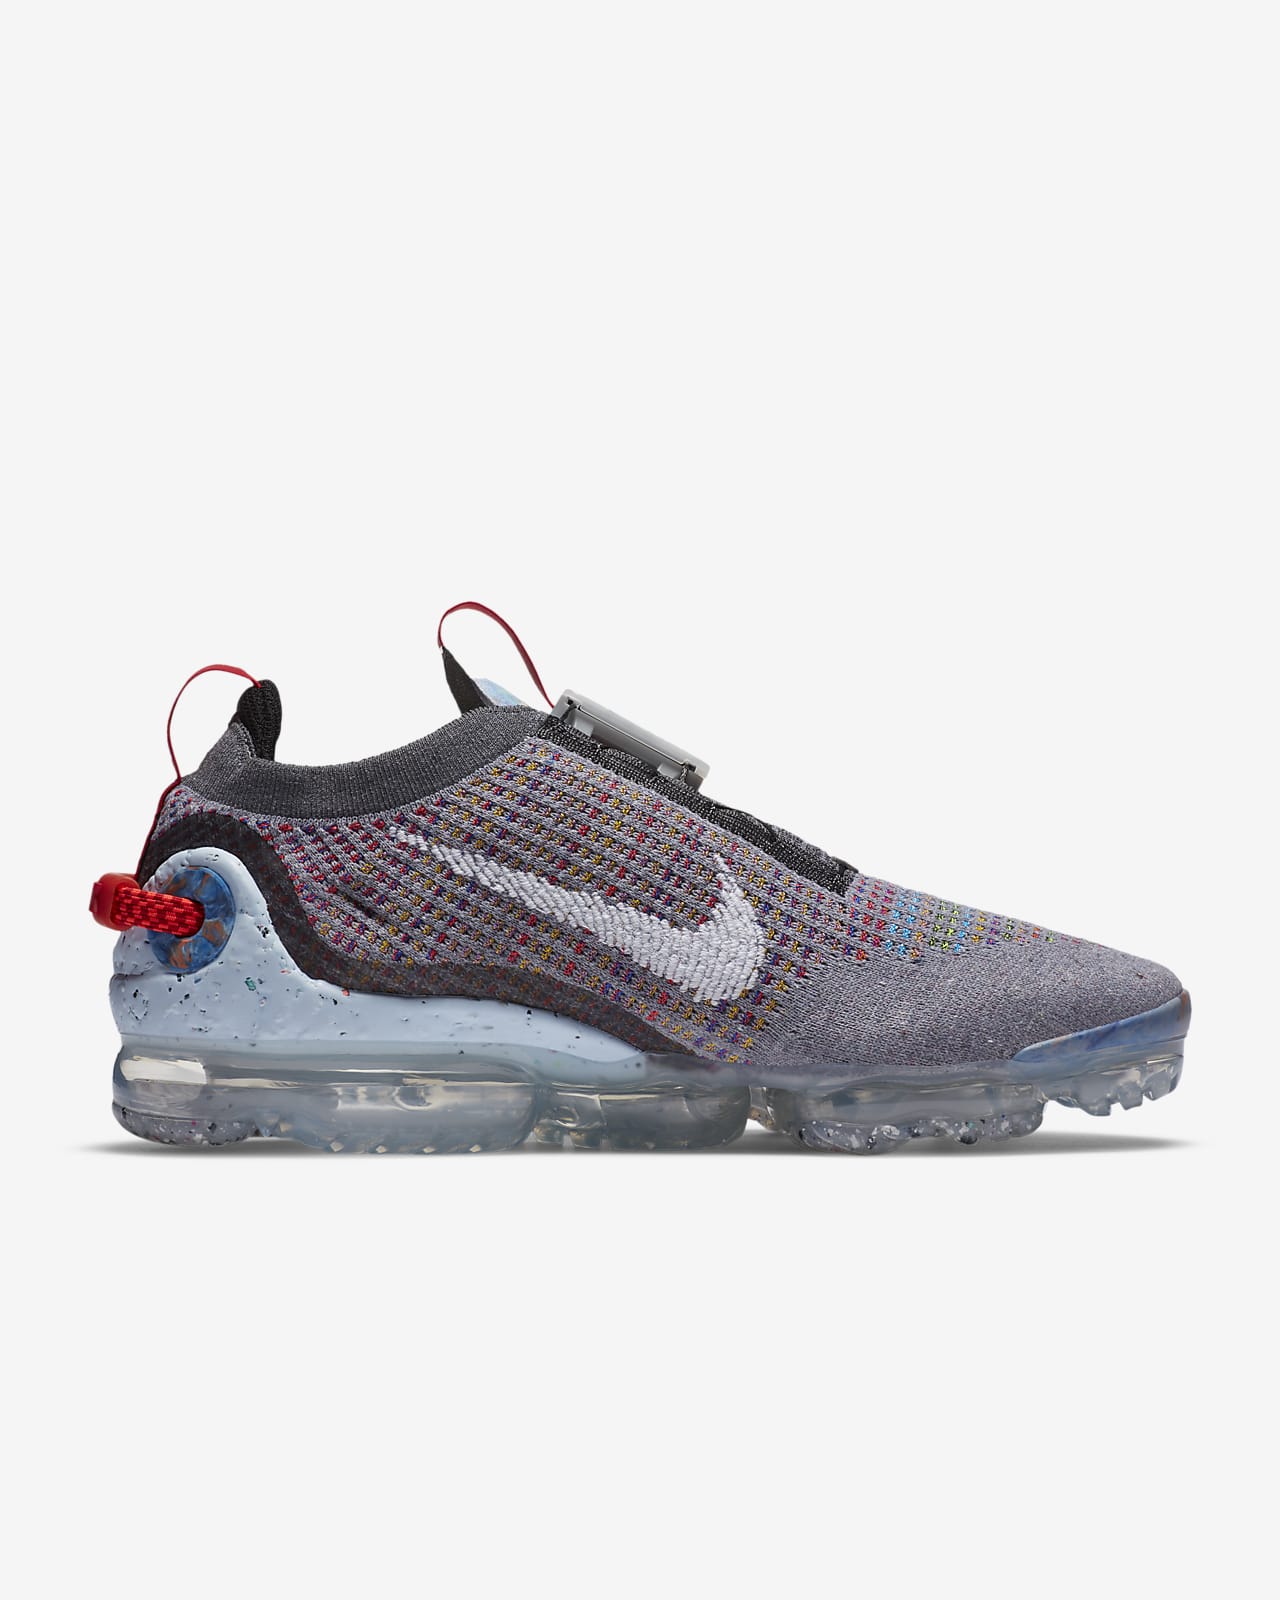 Off White x Nike Air VaporMax Flyknit Black in 2020 Air